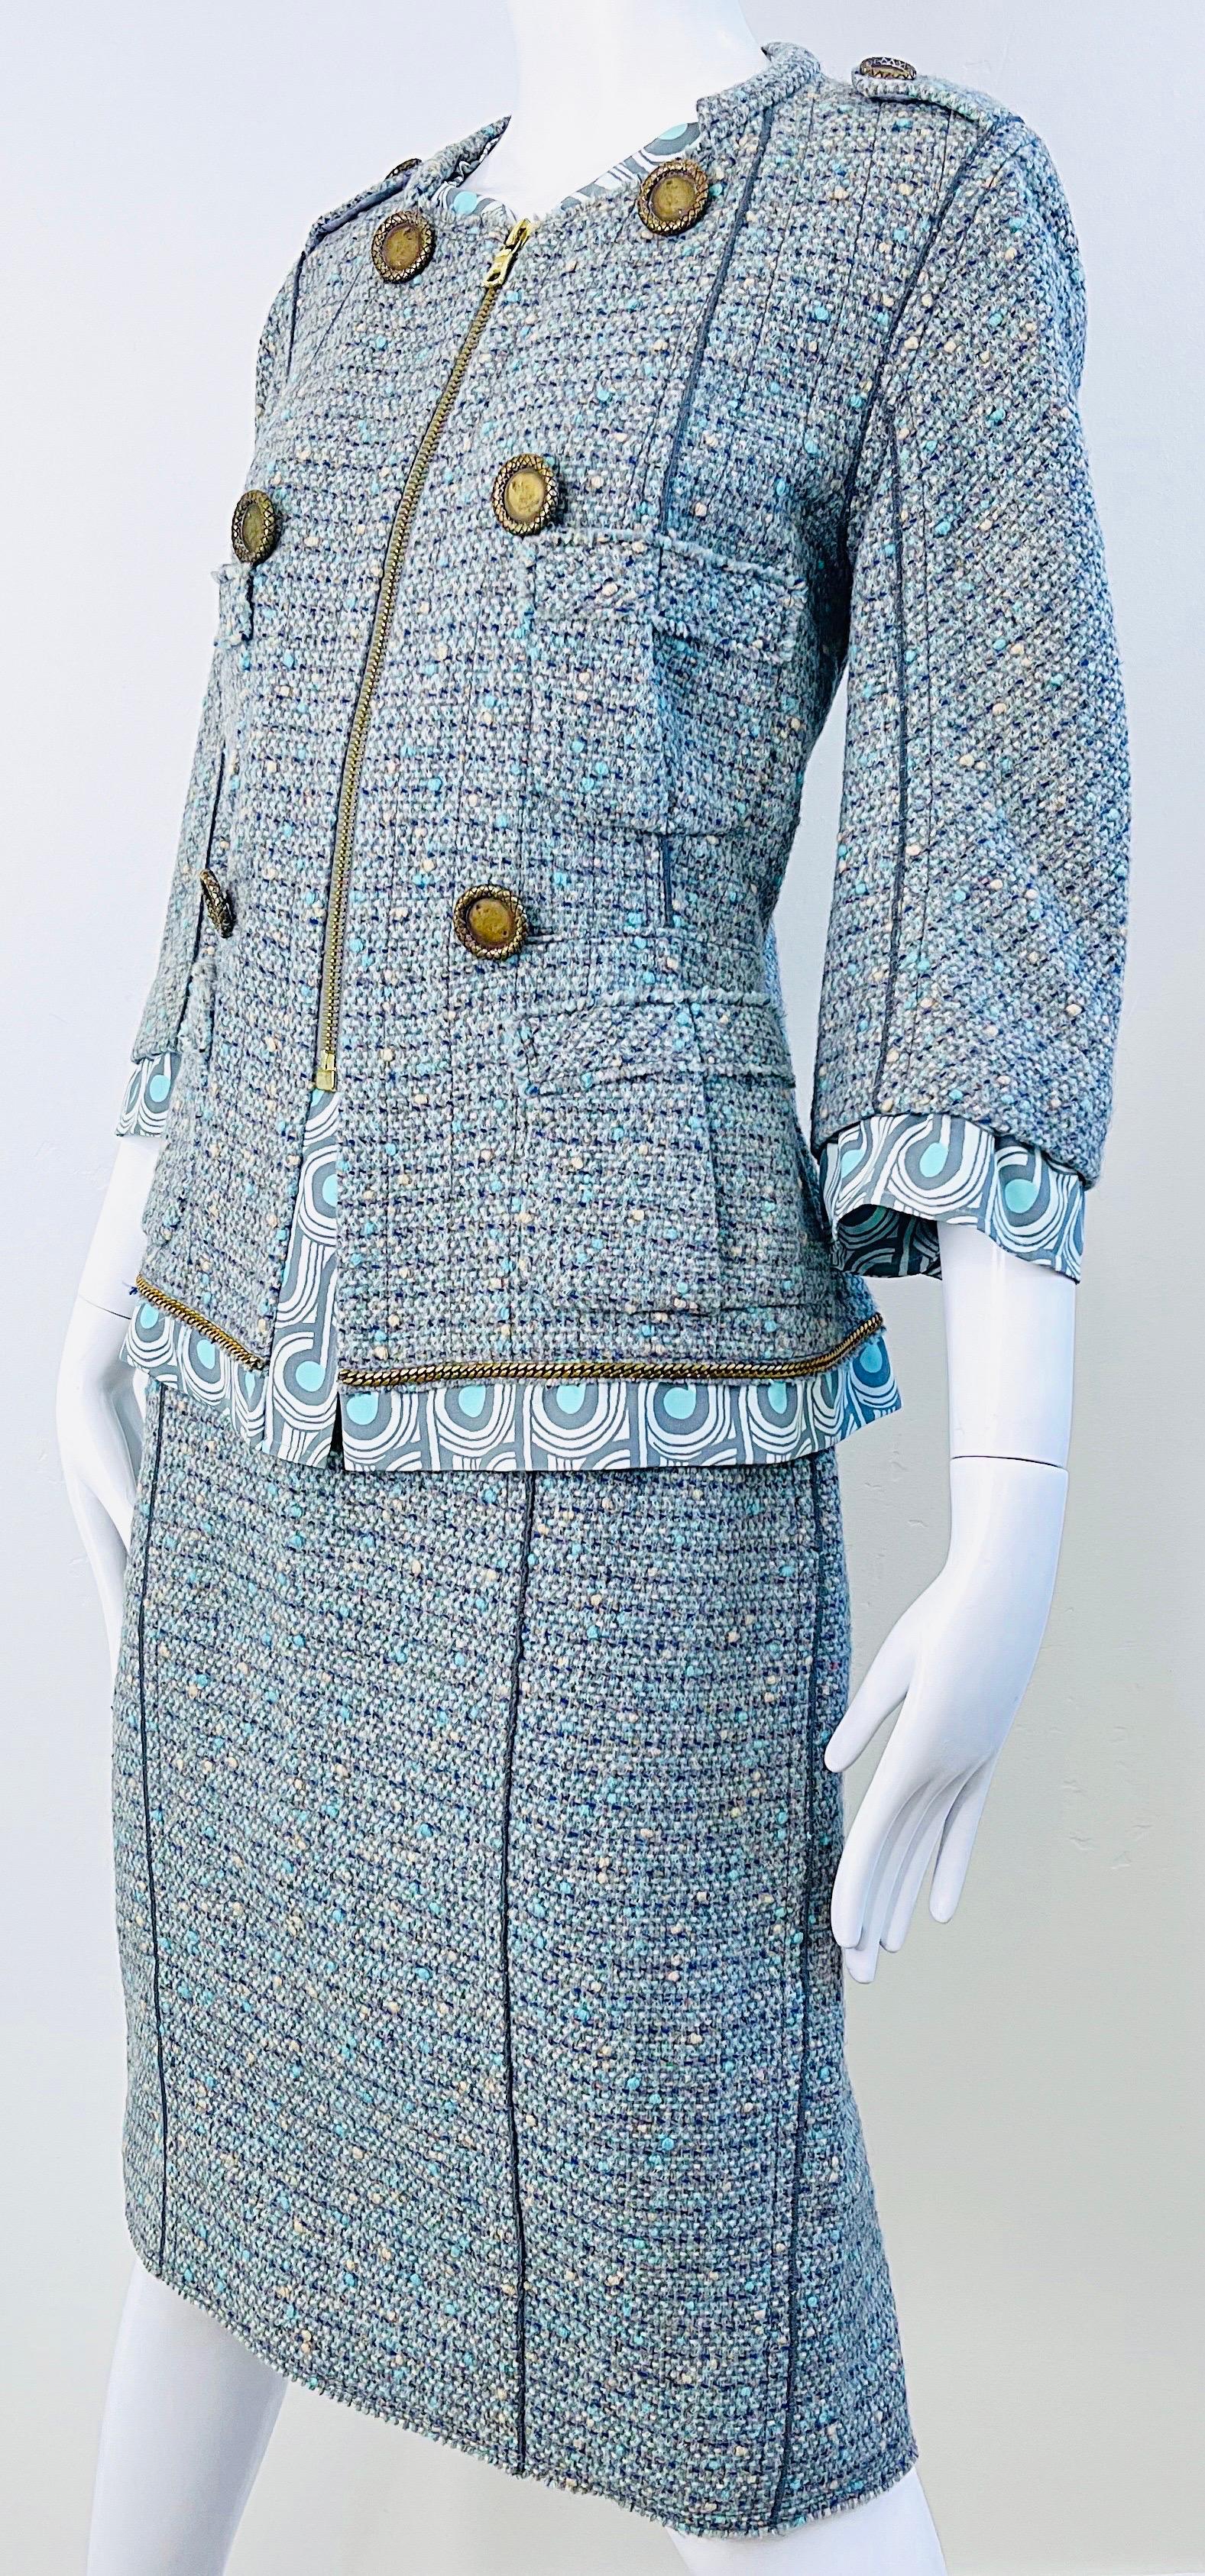 Marc Jacobs Spring 2005 Size 8 Blue Green Fantasy Tweed Wool Skirt Suit For Sale 9